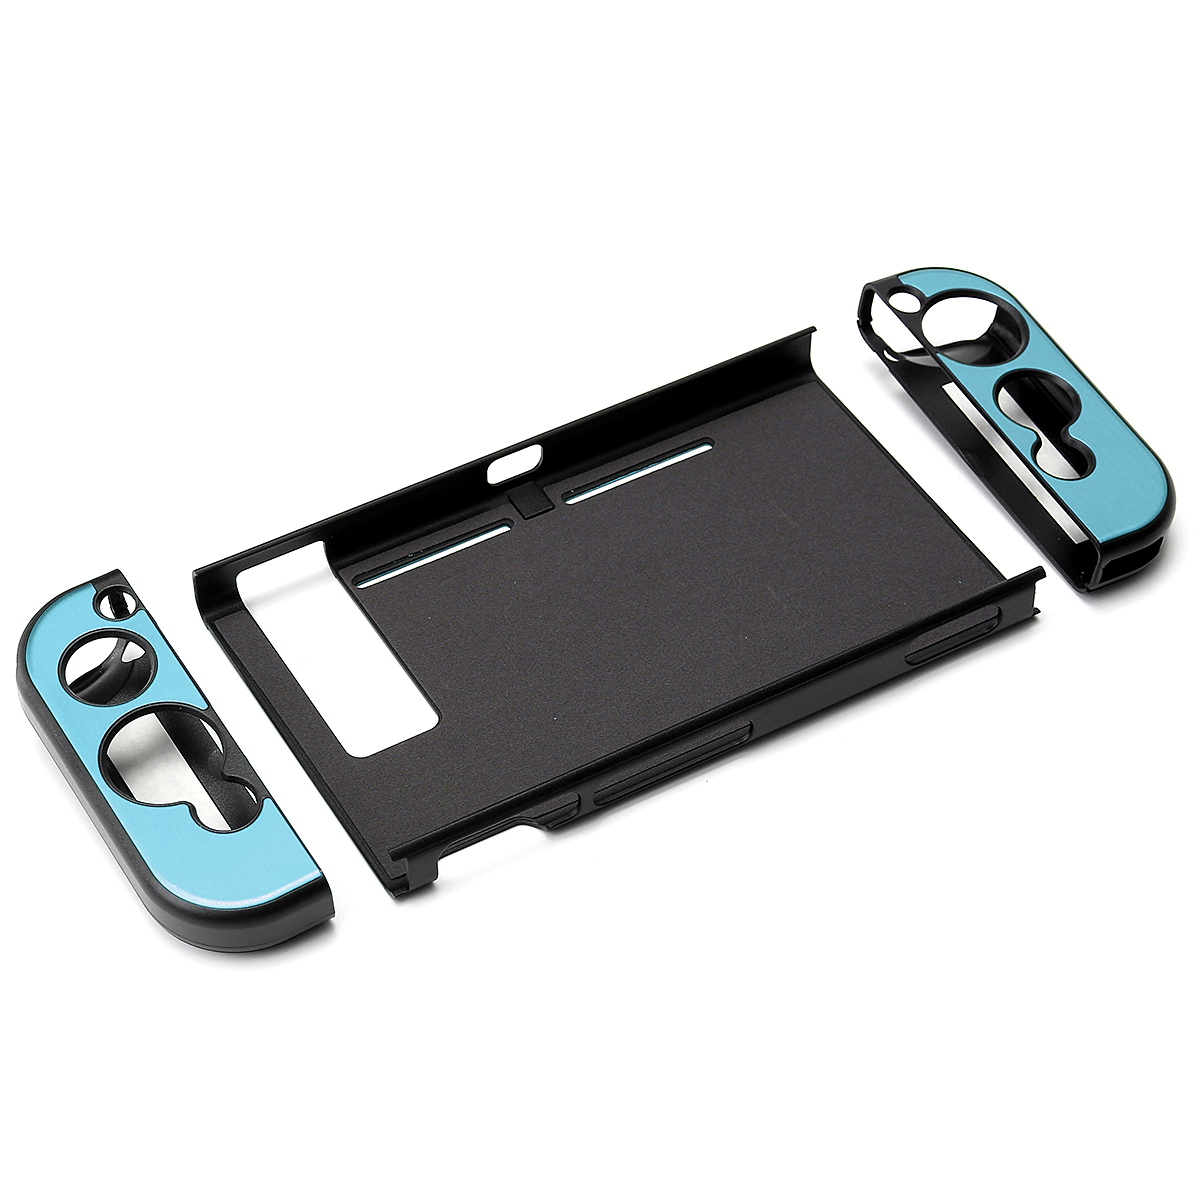 Anti-slip-Aluminum-Case-Cover-Skin-Shell-Protective-For-Nintendo-Switch-Game-Console-1431666-3